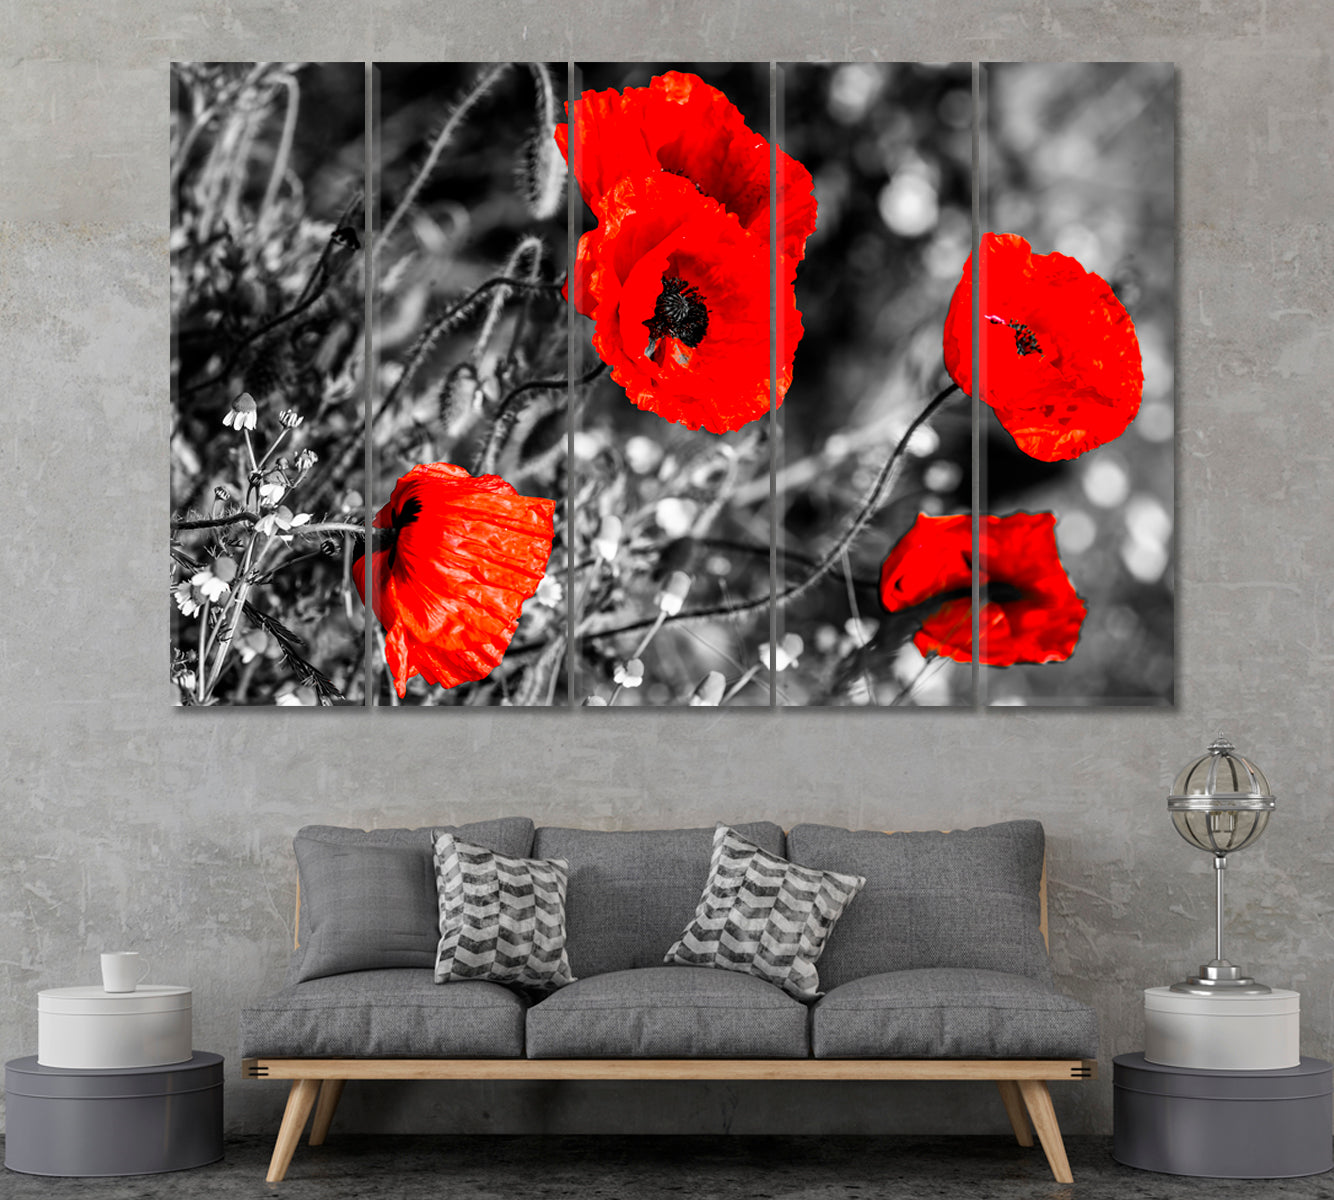 Poppy Flowers Canvas Print ArtLexy 5 Panels 36"x24" inches 